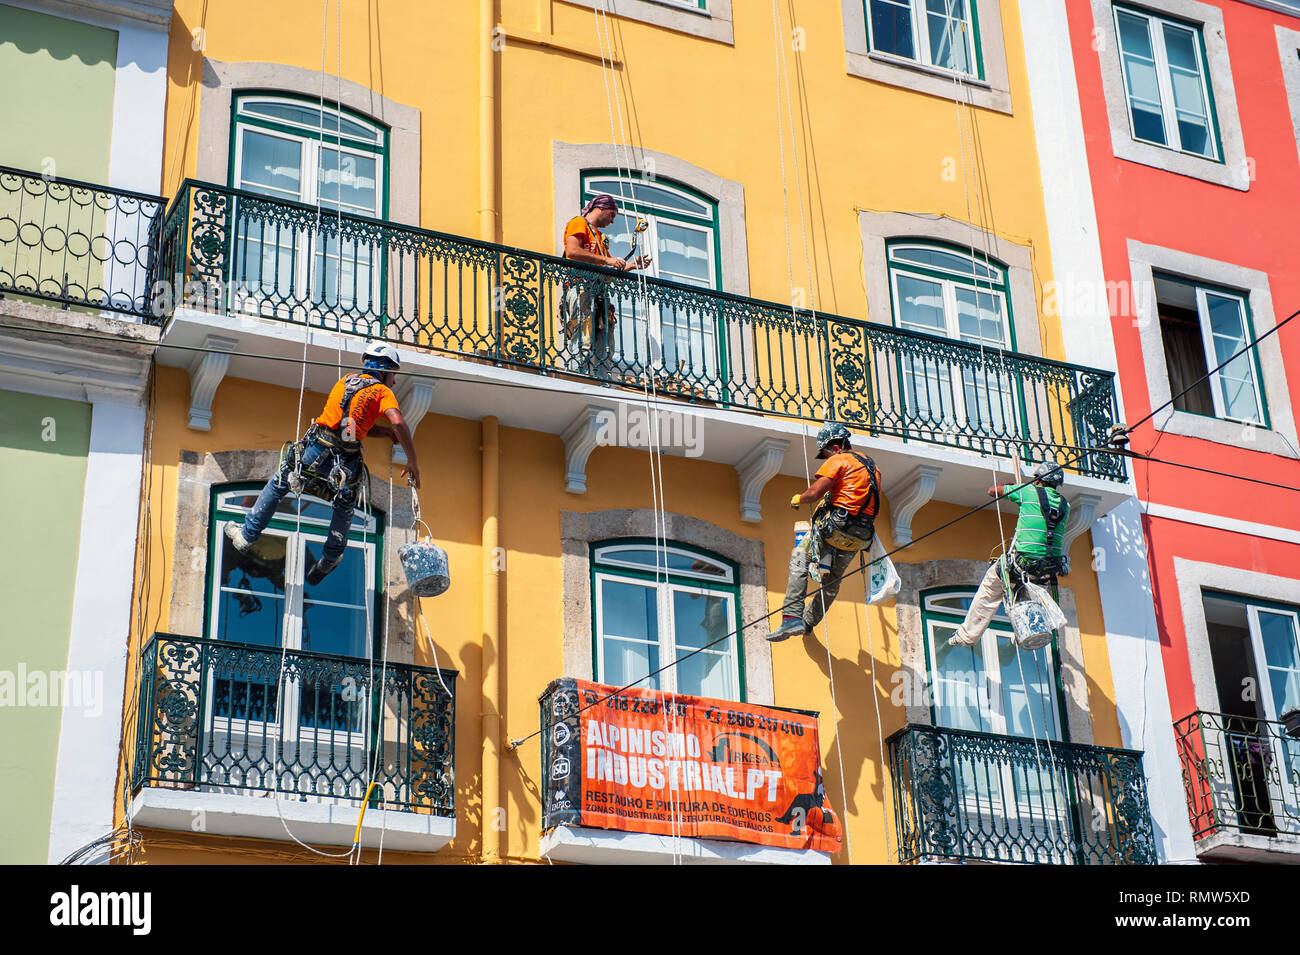 Painters hanging from ropes while working on a building in Principe Real, Lisbon, Portugal. Stock Photo